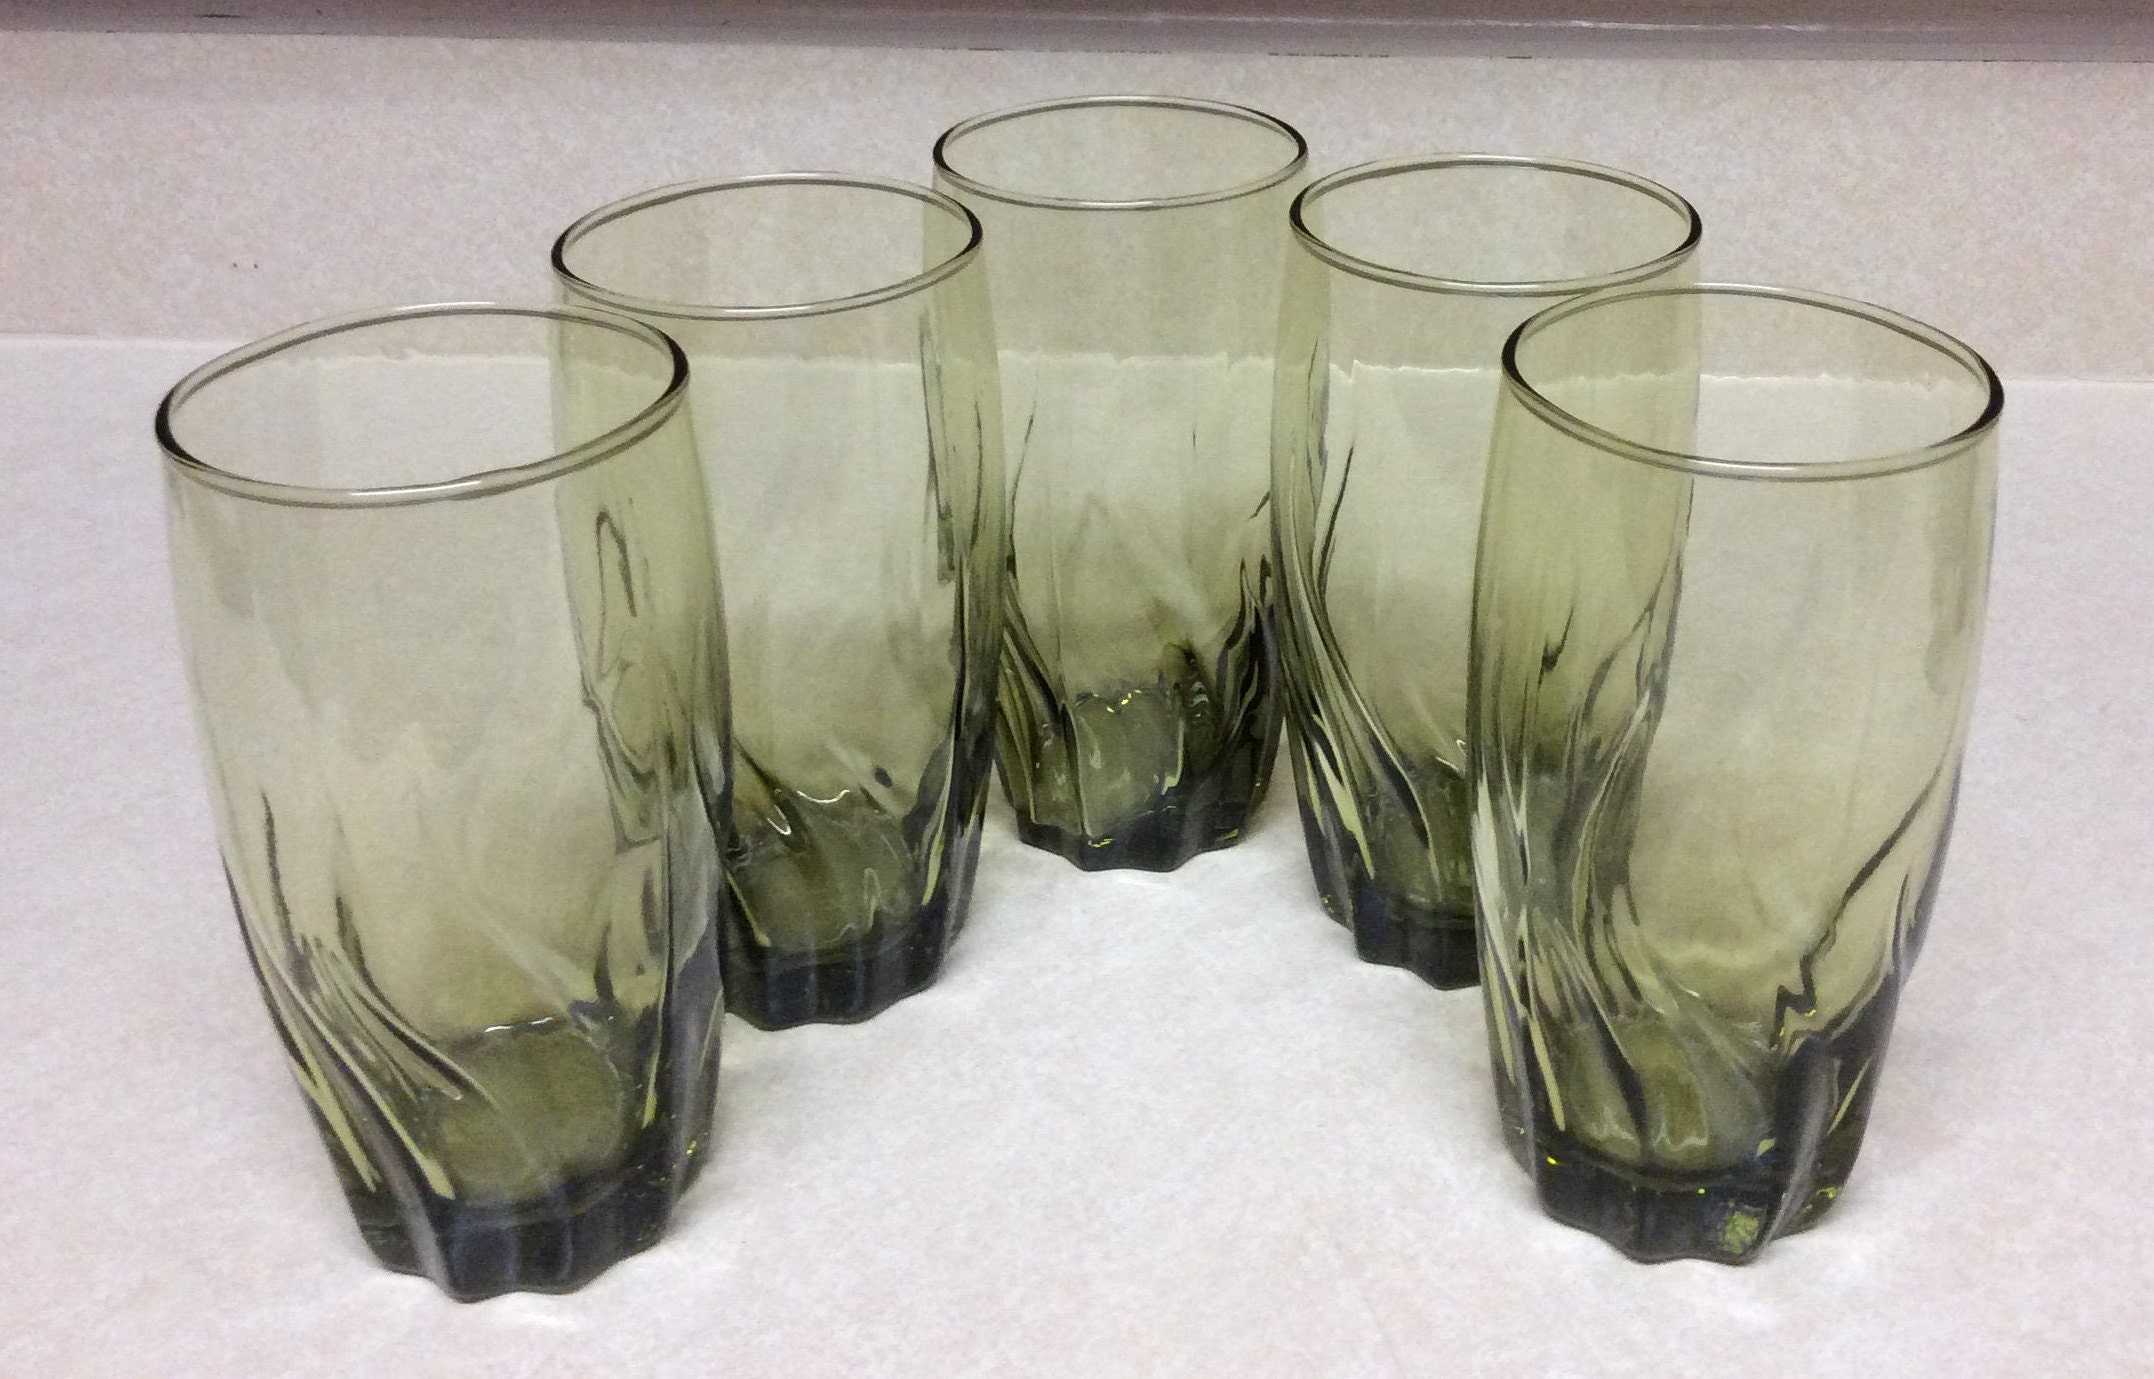 Vintage 1950s Green Ivy Drinking Glasses Set of 8 Tumblers Cottagecore  Kitchen Decor Anchorglass Water Glasses NOS 